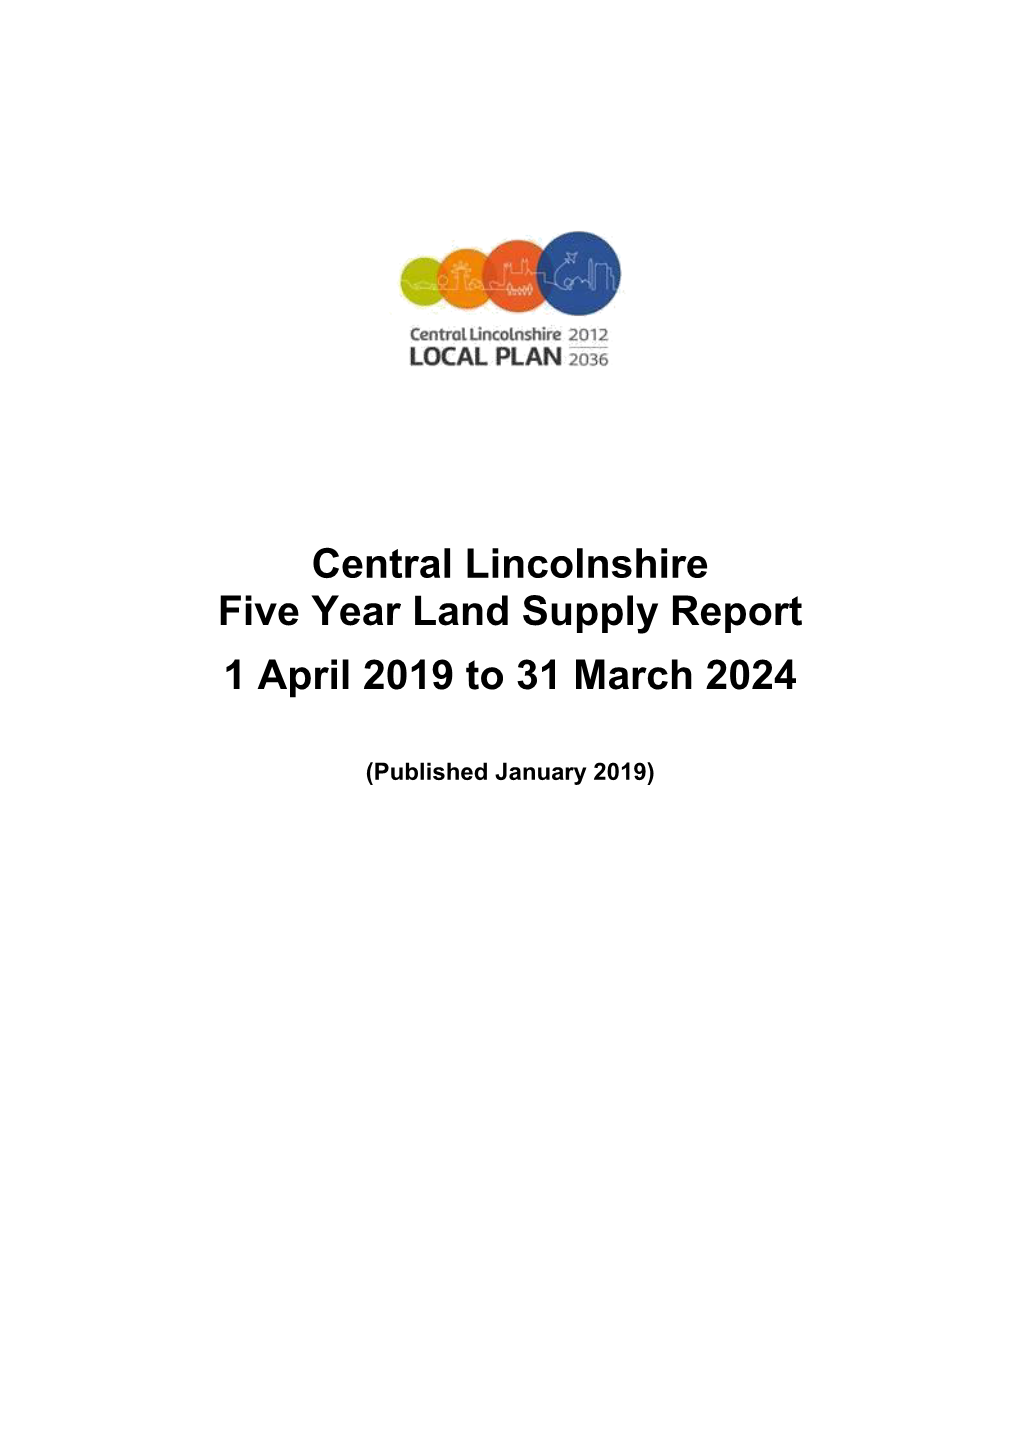 Central Lincolnshire Five Year Land Supply Report 1 April 2019 to 31 March 2024